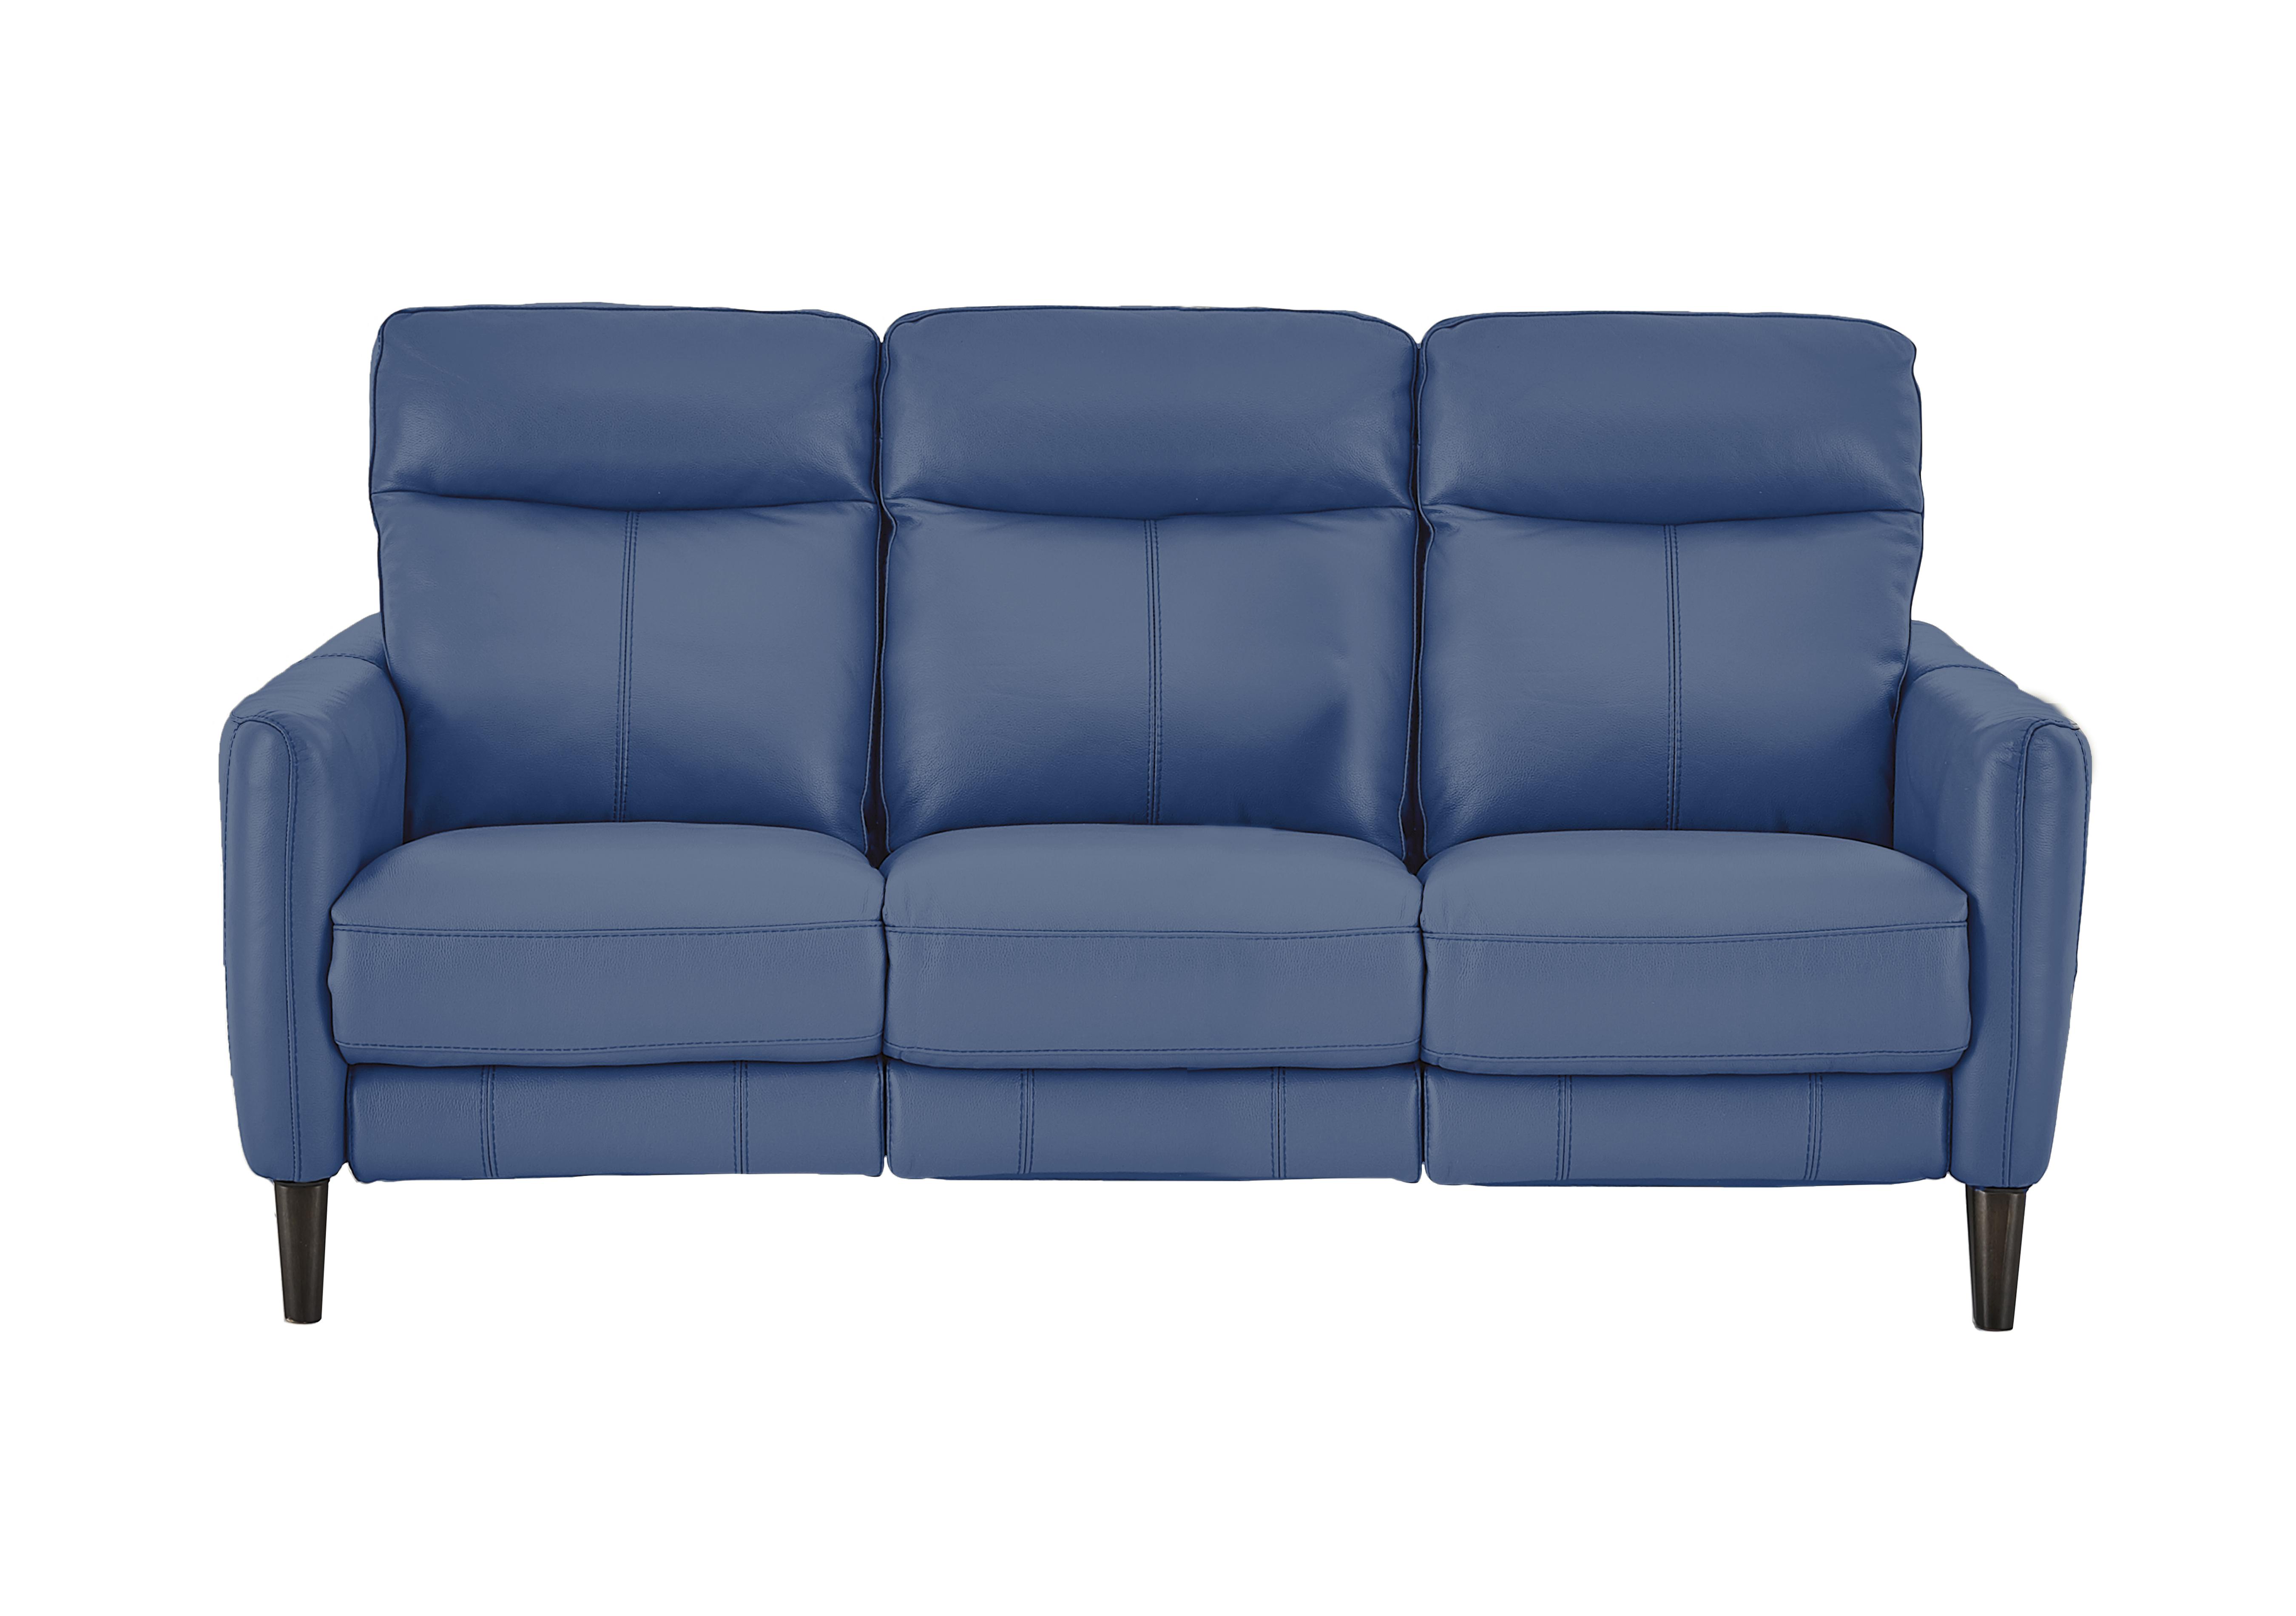 Compact Collection Petit 3 Seater Leather Sofa in Bv-313e Ocean Blue on Furniture Village